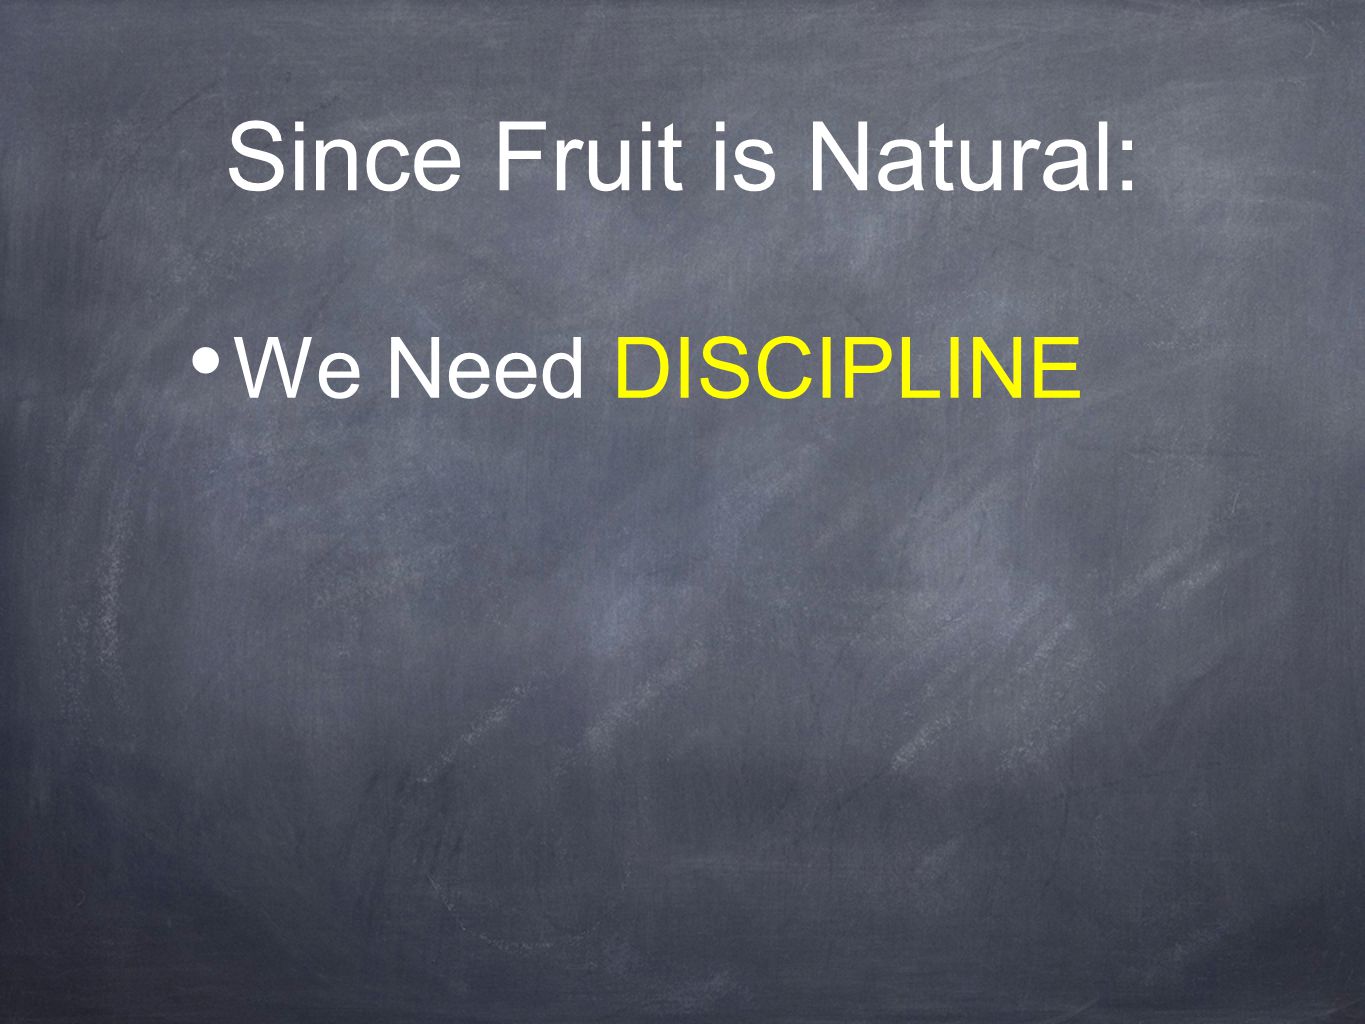 Since Fruit is Natural: We Need DISCIPLINE